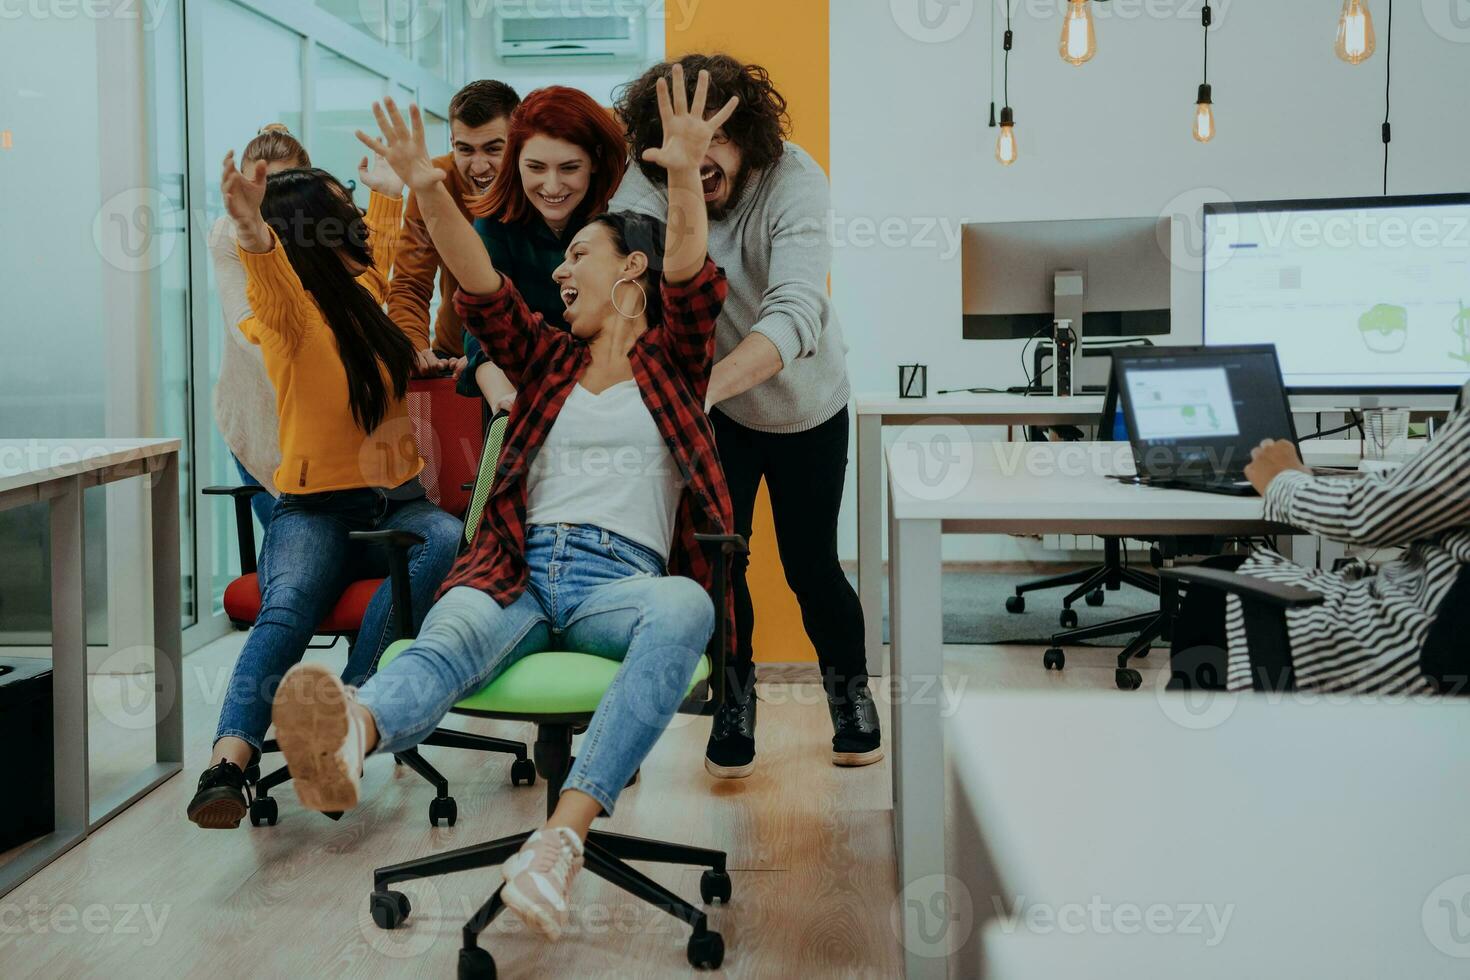 Team building and office fun. Young cheerful businesspeople in smart casual wear having fun while racing on office chairs and smiling. photo